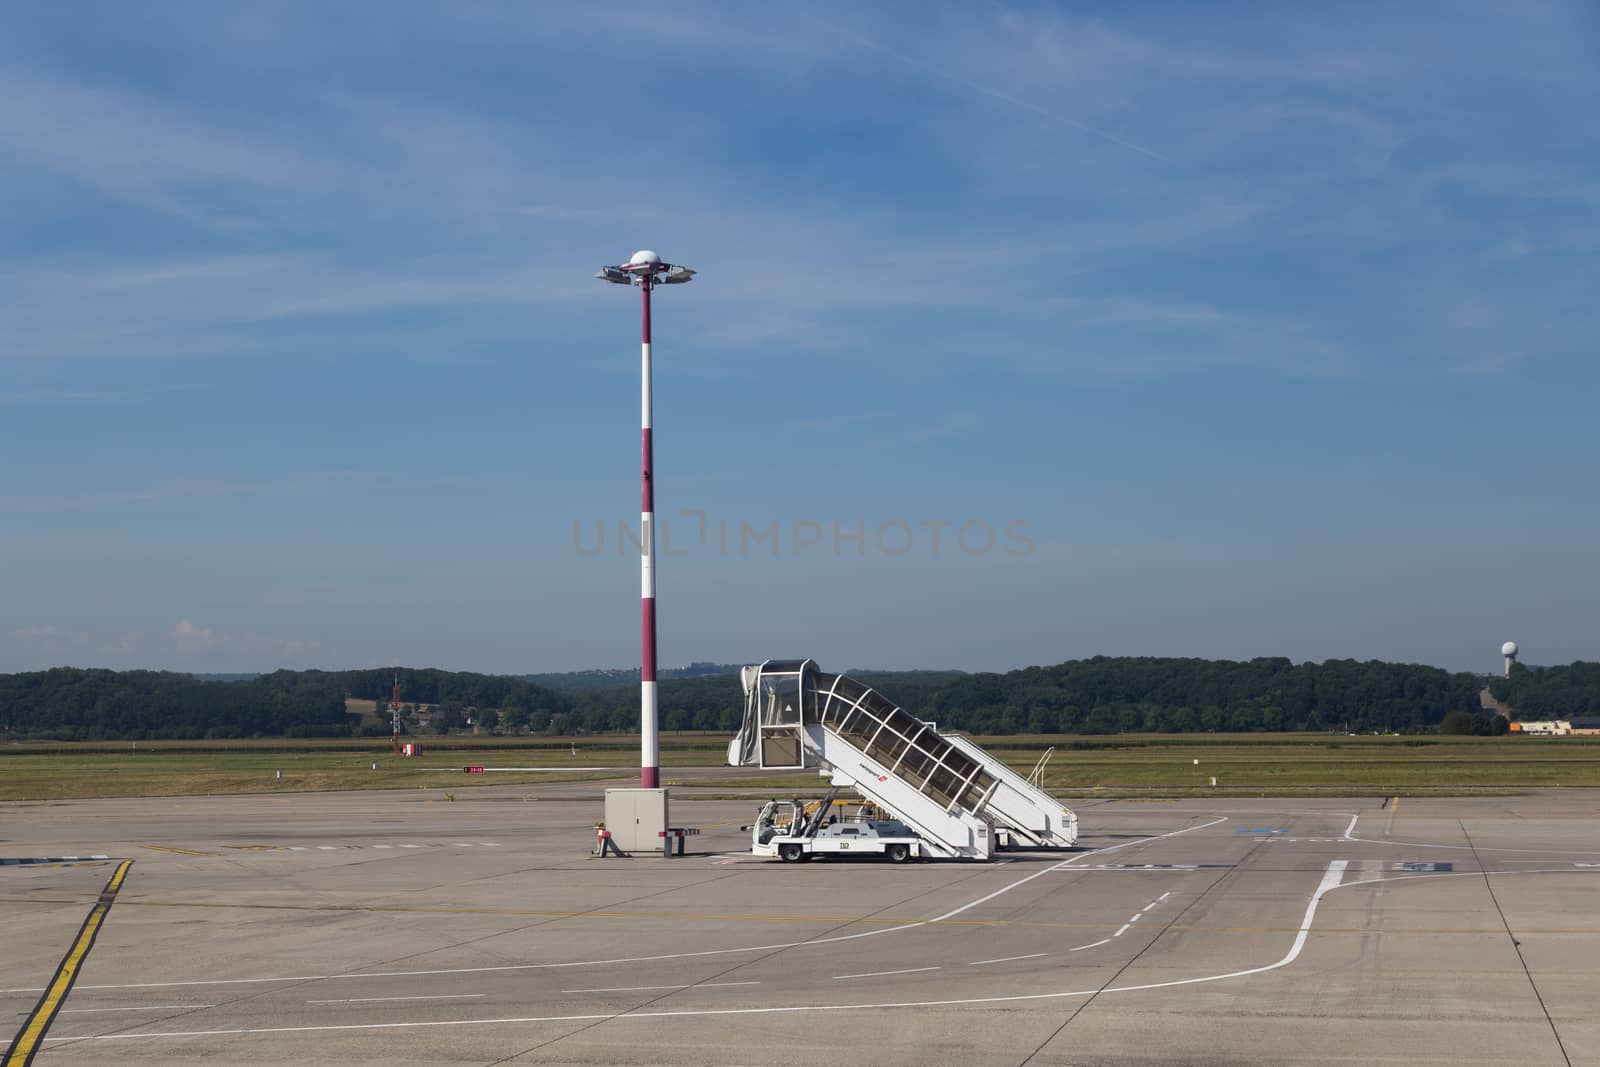 Basel, Switzerland - July 18, 2017: An airstair parked at the airport